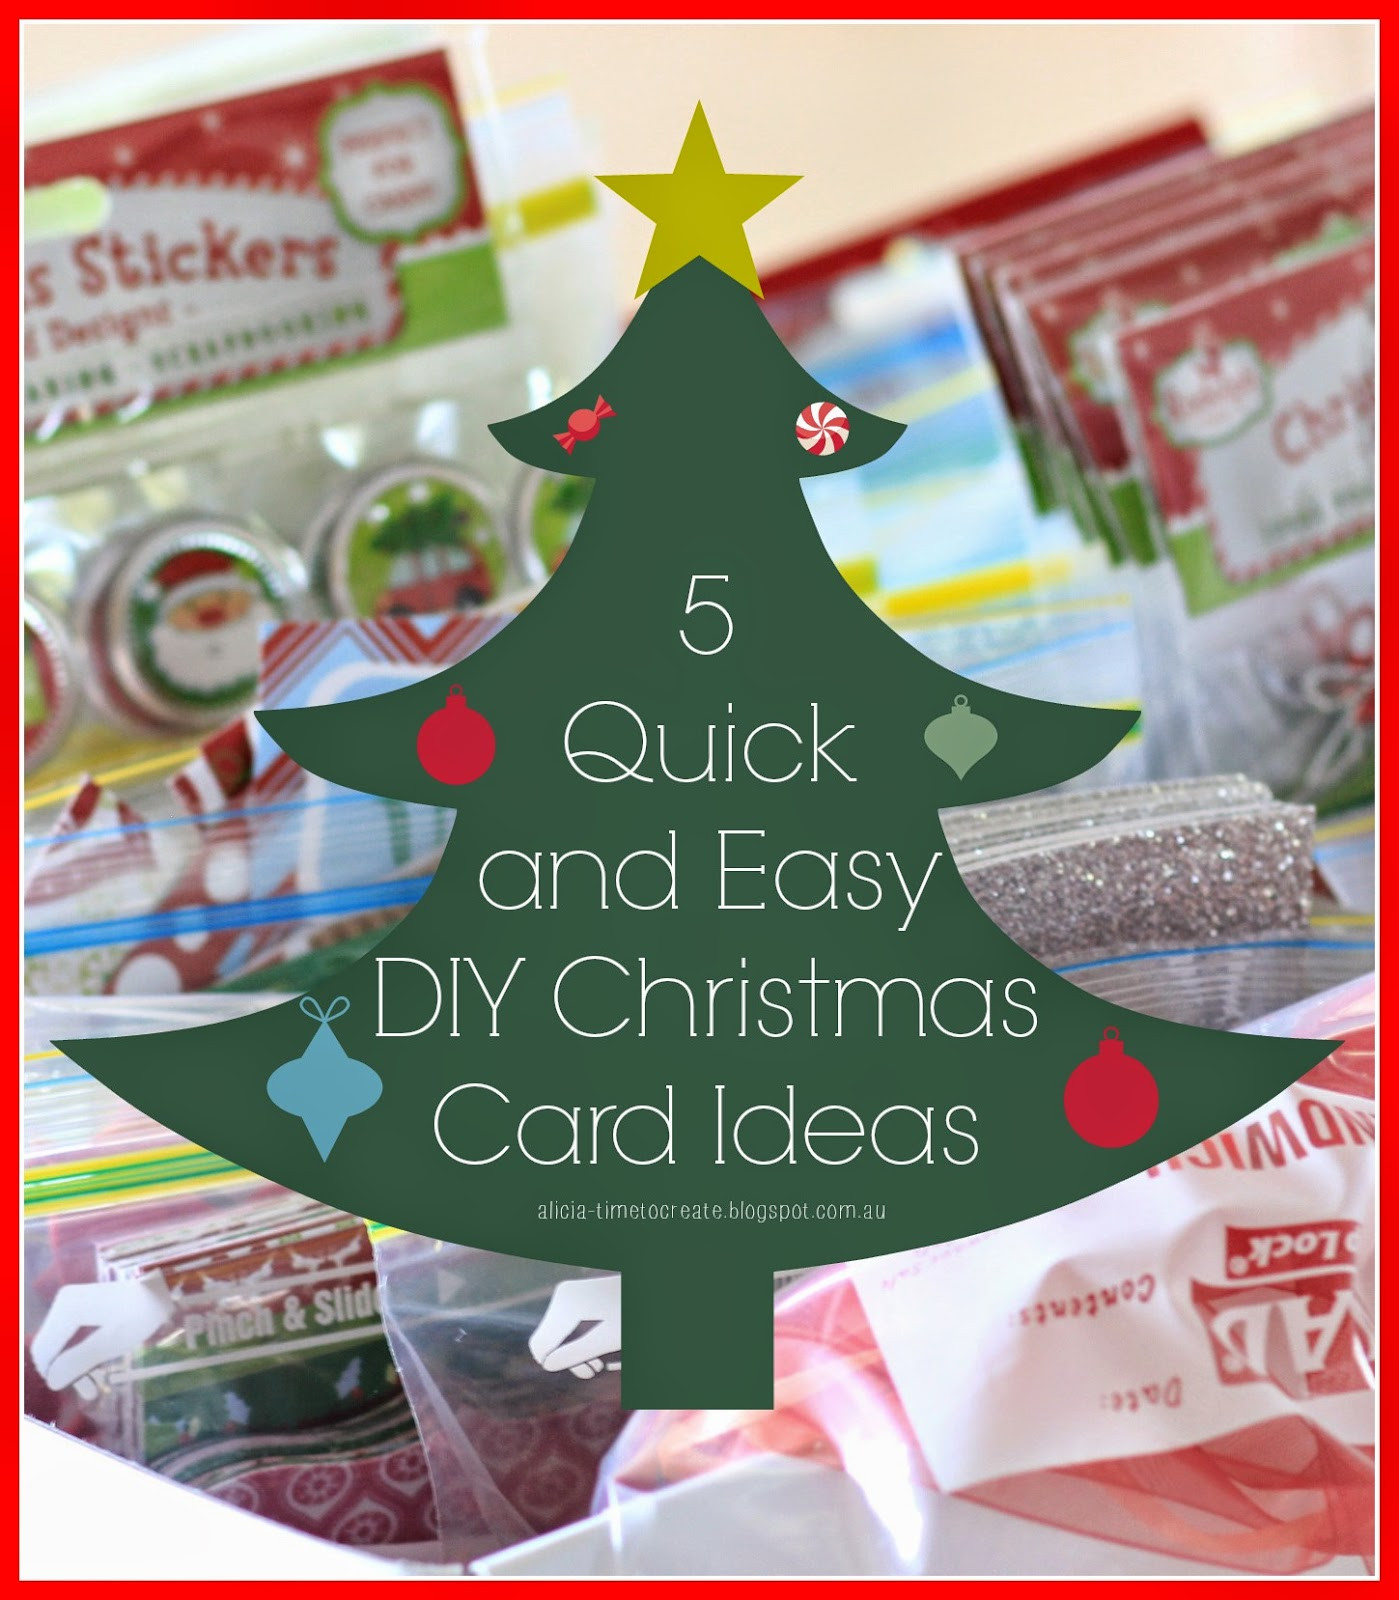 Easy DIY Christmas Cards
 Time to Create 5 Quick and Easy DIY Christmas Card Ideas